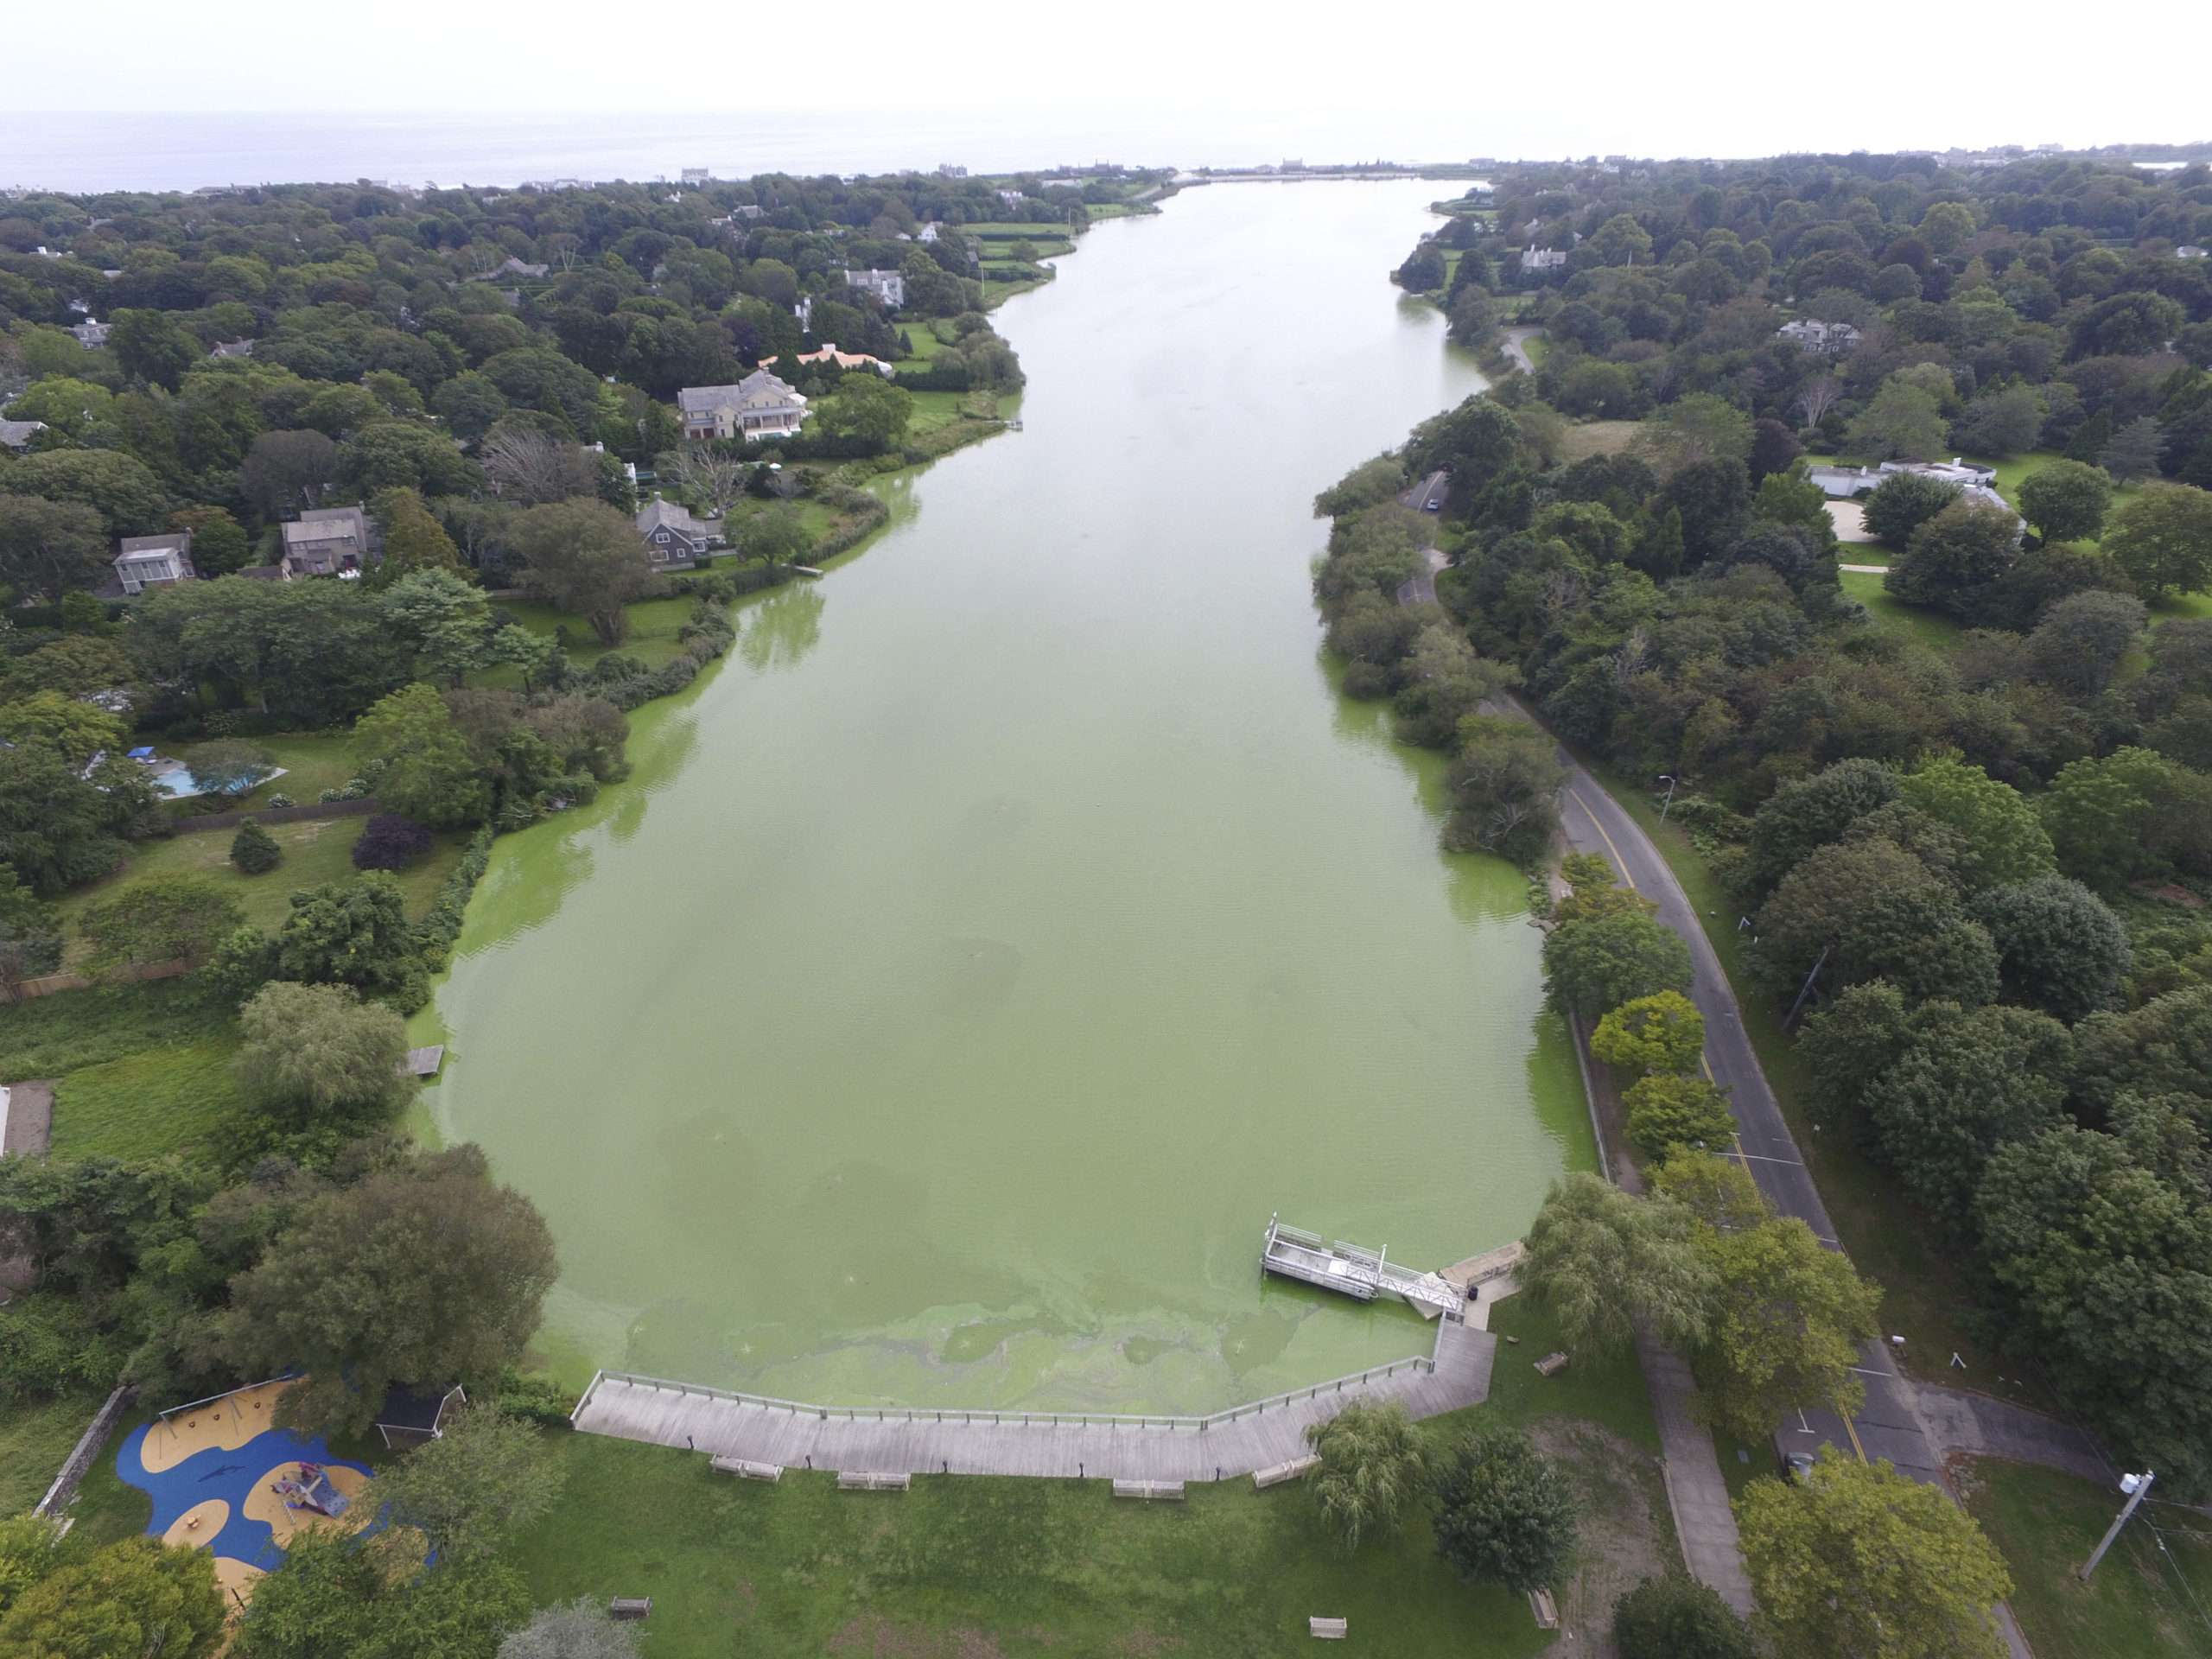 Lake Agawam in Southampton Village has suffered from chronic algae blooms, which are exacerbated by the heavy downpours that have defined the rainfall pattens in the Northeast in recent decades. 